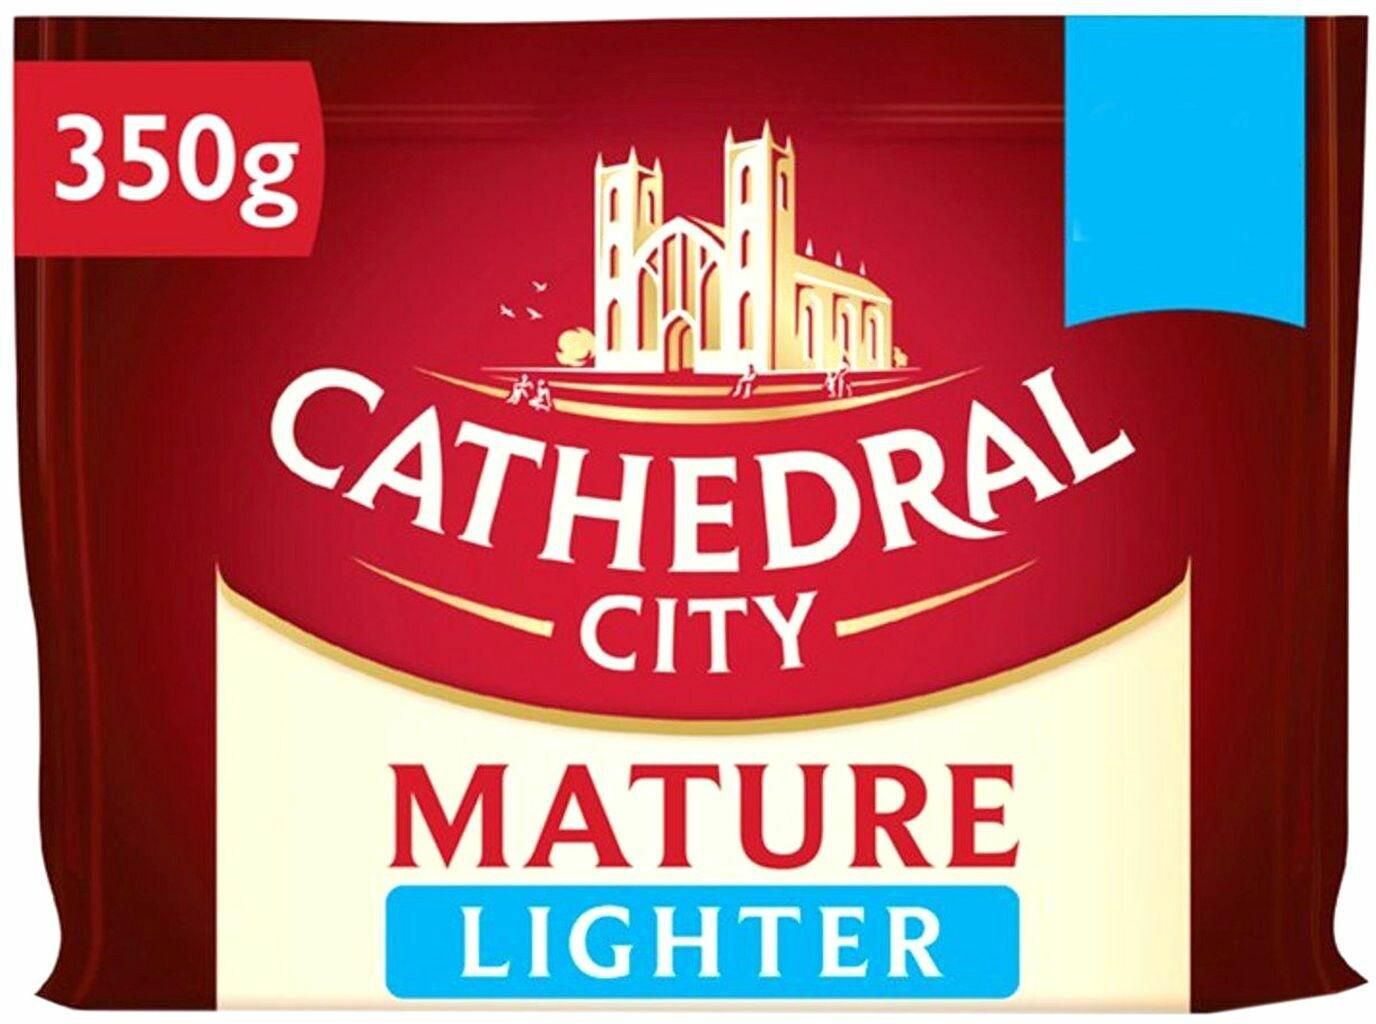 Cathedral City Lighter Cheddar Cheese 350g